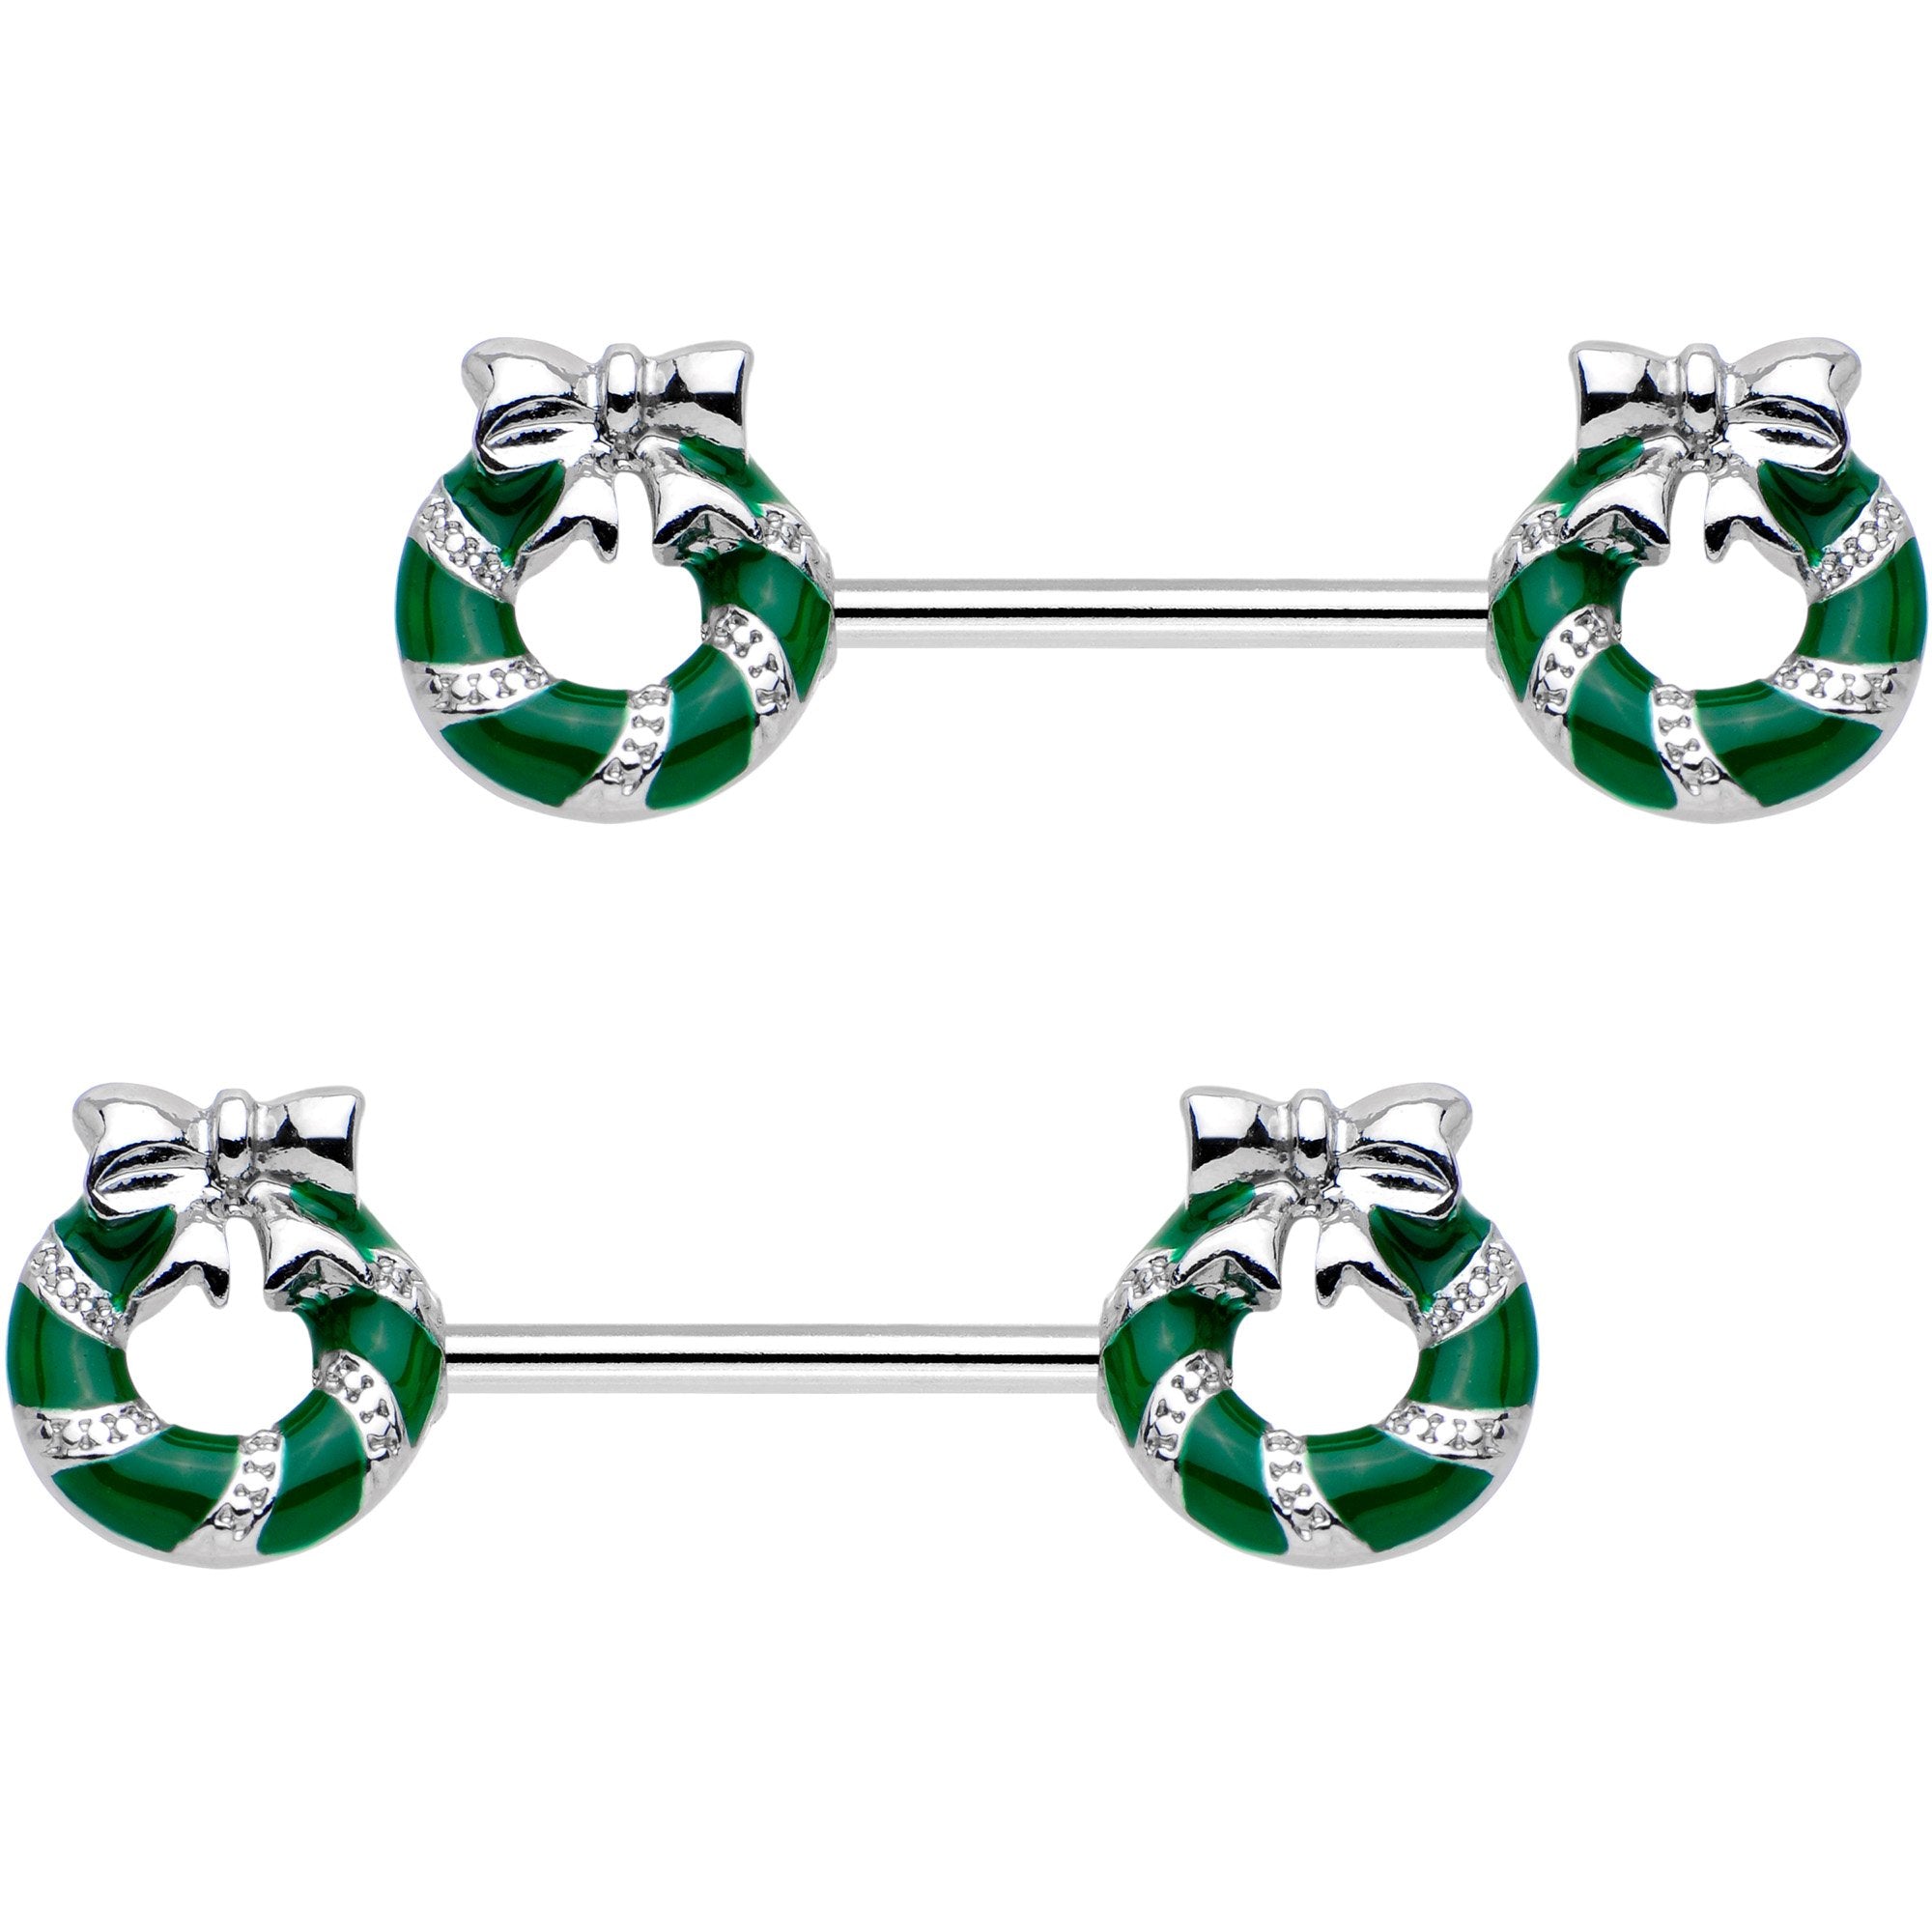 9/16 Minty Green Christmas Candy Cane Wreath Barbell Nipple Ring Set